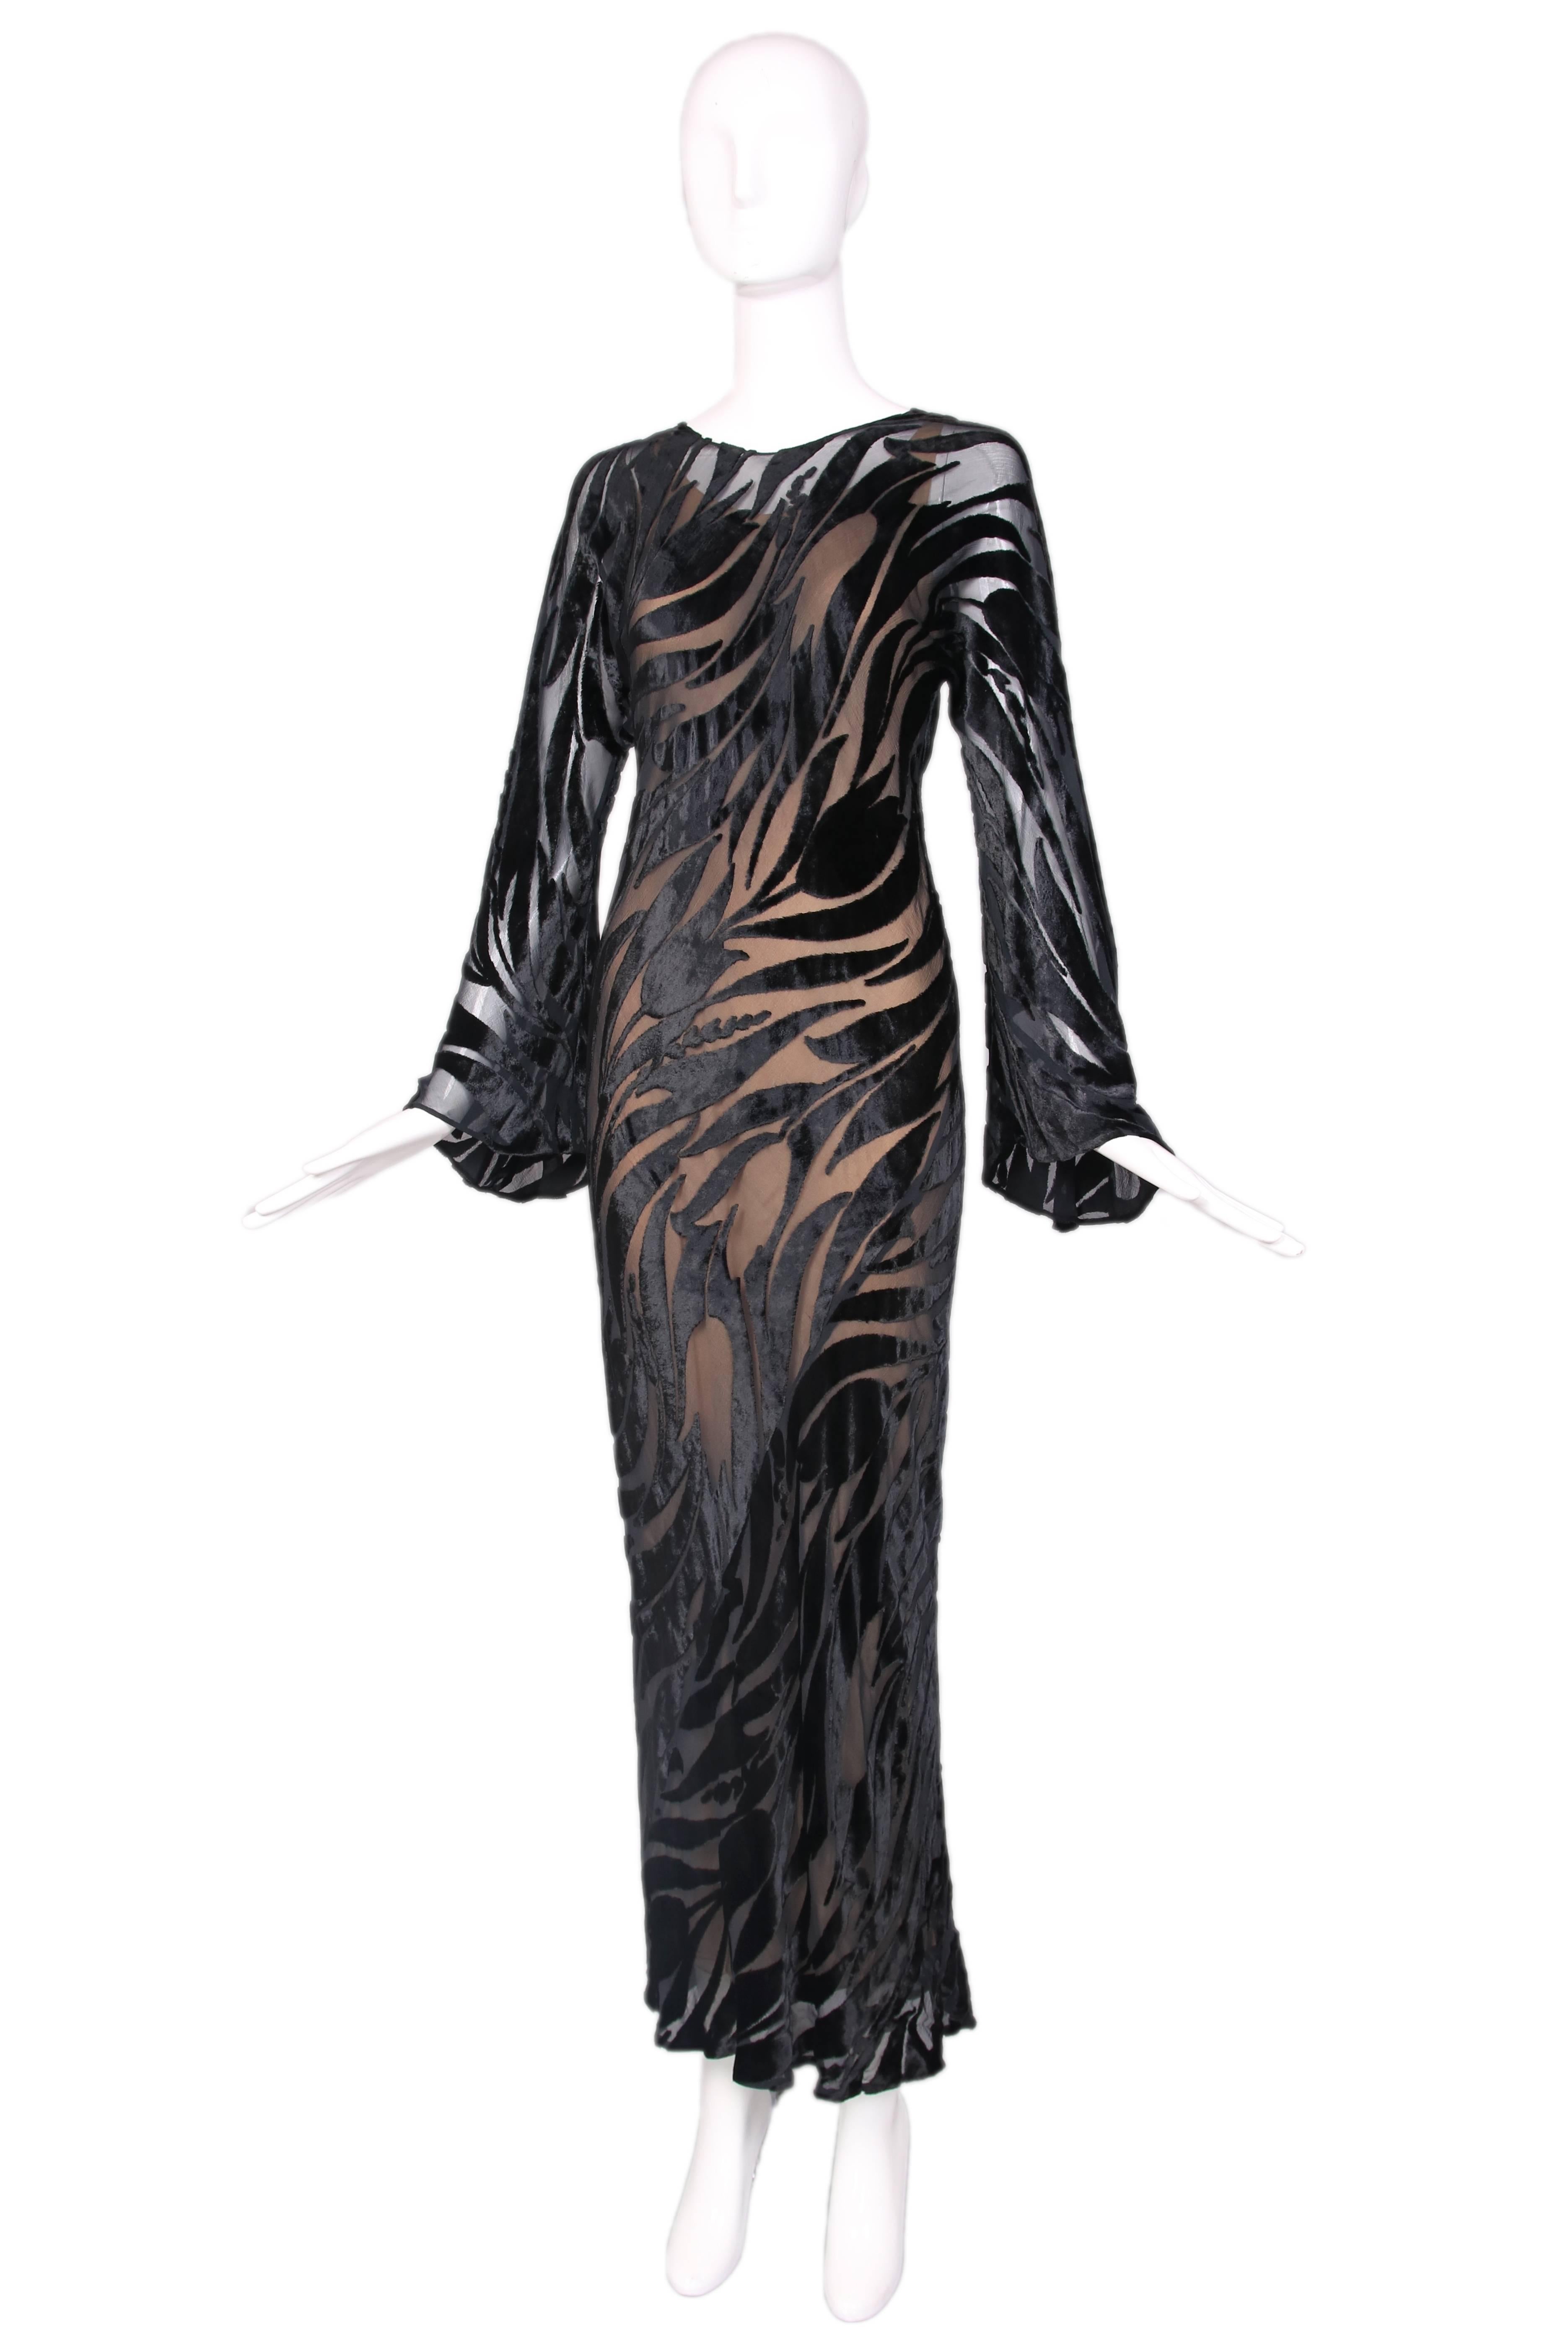 1974 Halston black silk velvet burnout evening gown w/ bell sleeves. Velvet tulip pattern all over and nude colored slip dress underneath - both slip and gown are cut on the bias. In excellent condition. No size tag, please consult measurements.